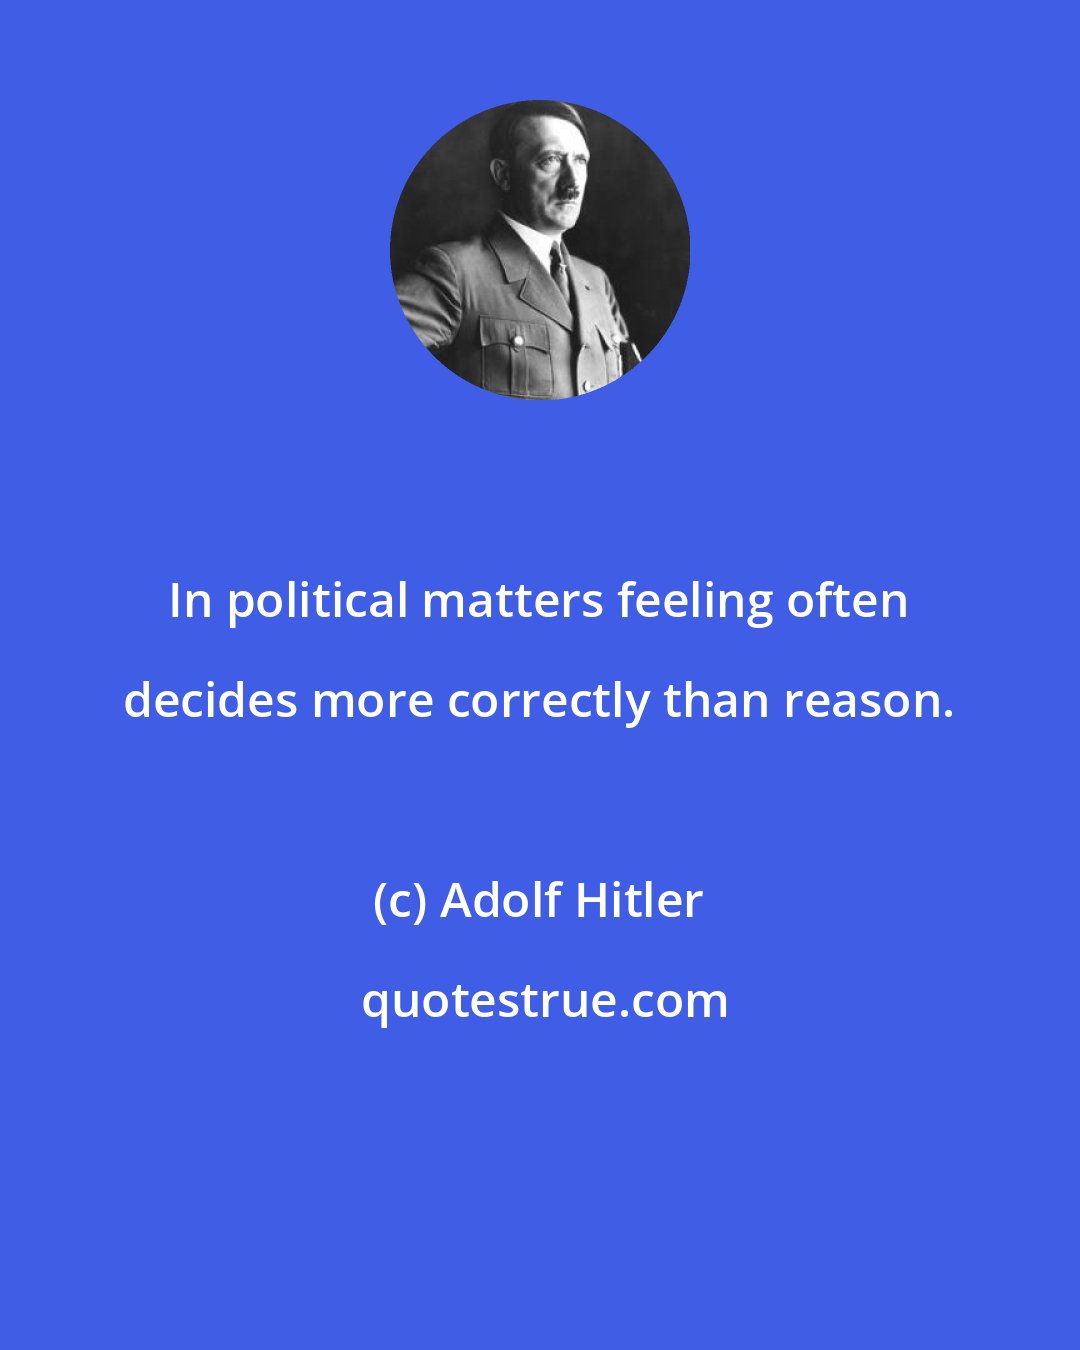 Adolf Hitler: In political matters feeling often decides more correctly than reason.